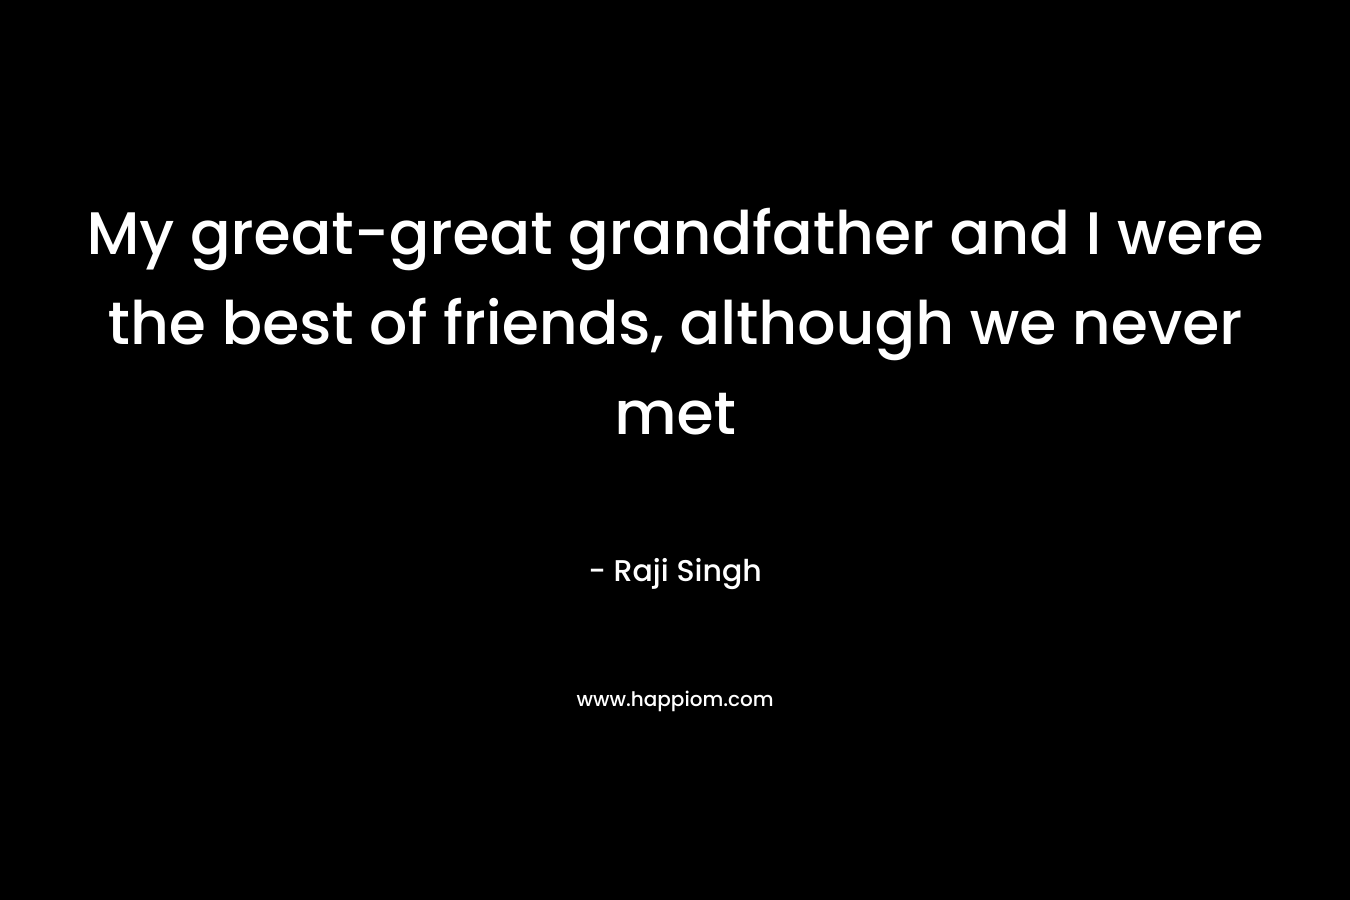 My great-great grandfather and I were the best of friends, although we never met – Raji Singh